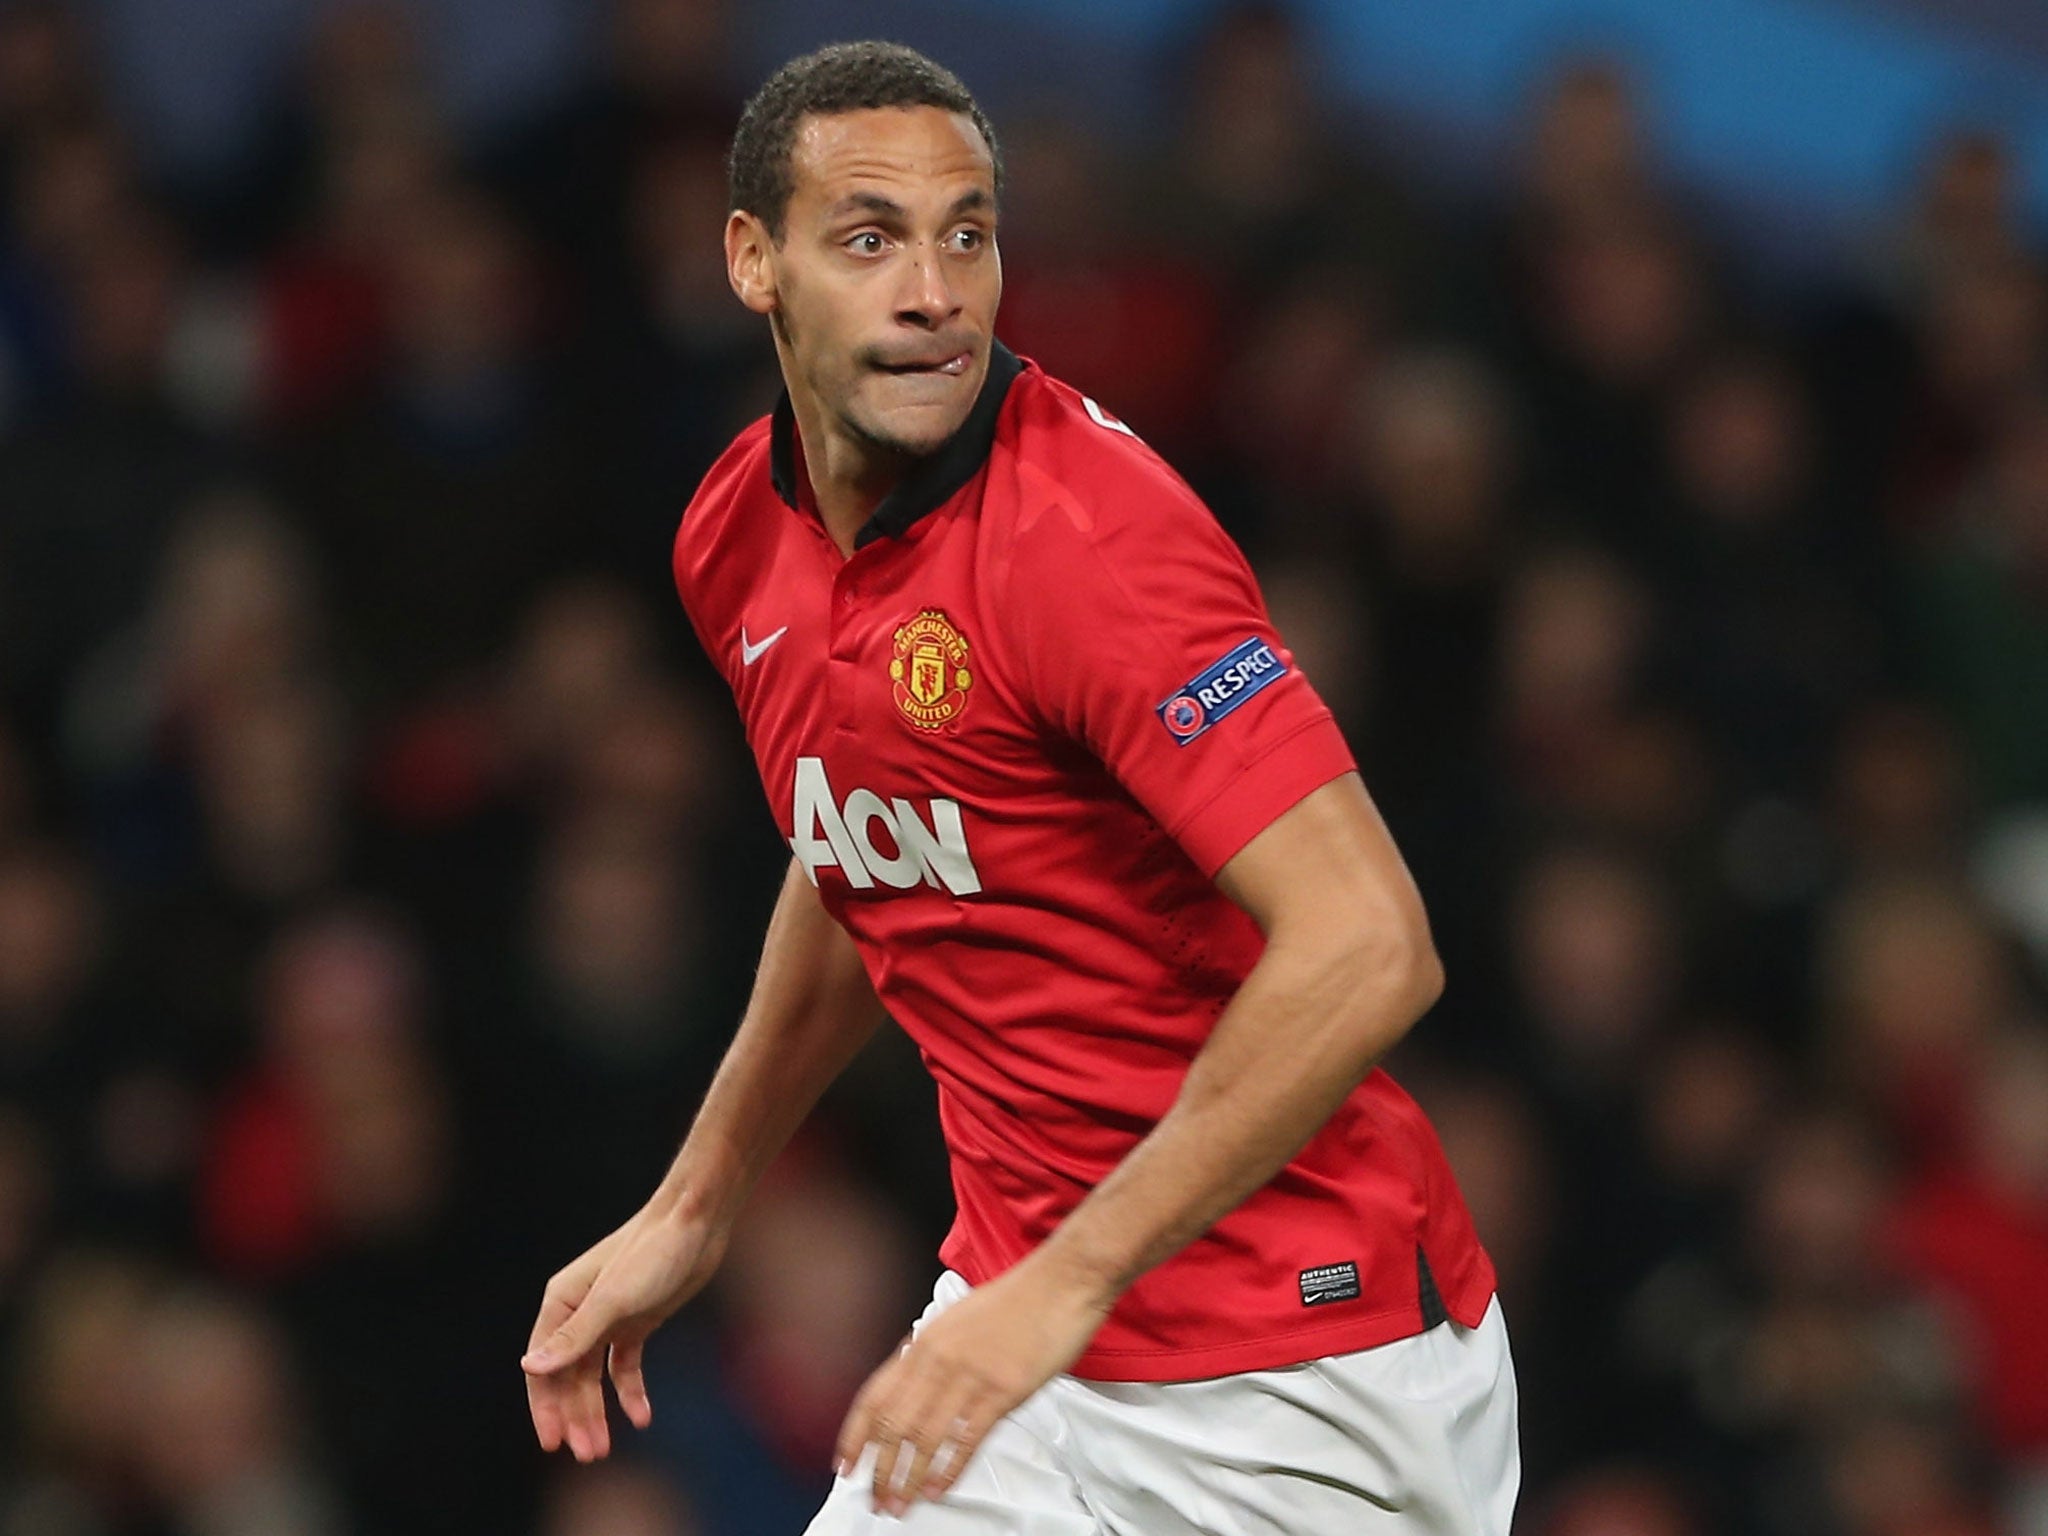 Rio Ferdinand could retire at the end of the season when his Manchester united contract expires to move into TV punditry